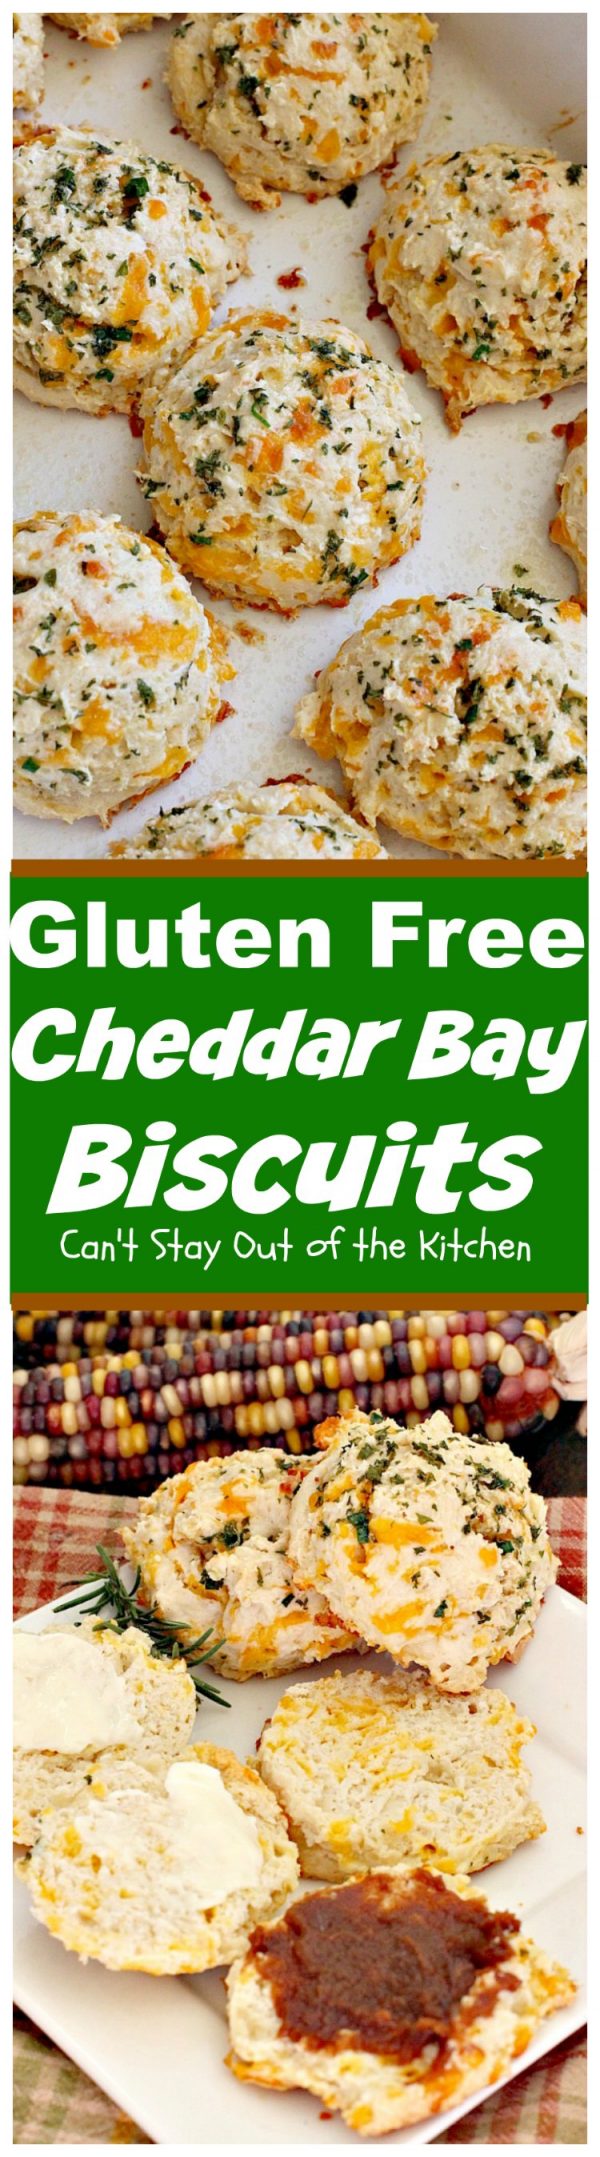 Gluten Free Cheddar Bay Biscuits – Can't Stay Out of the Kitchen